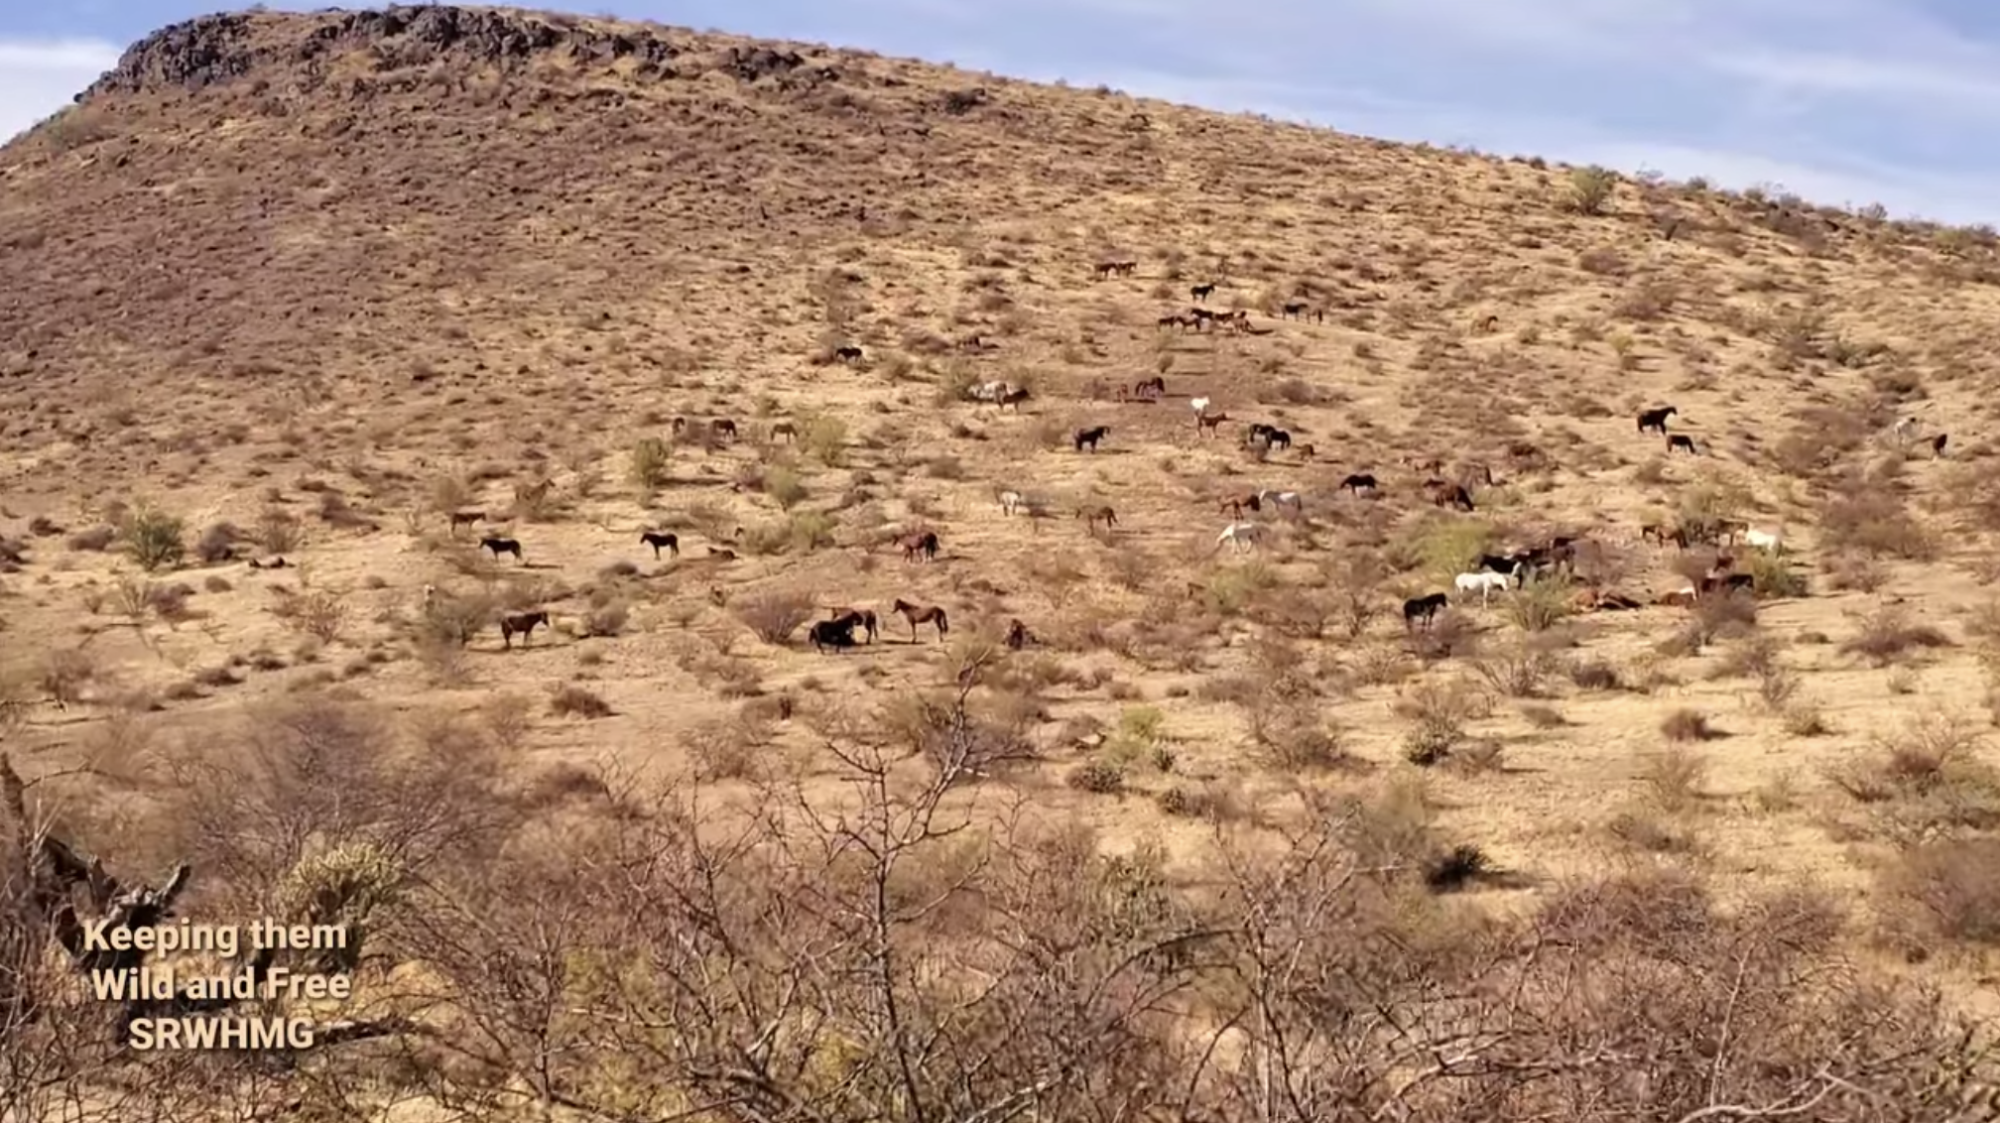 When ten different bands decide to hang out together, you get a mountain in the Tonto National Forest, beautifully decorated with every color Salt River wild horse.